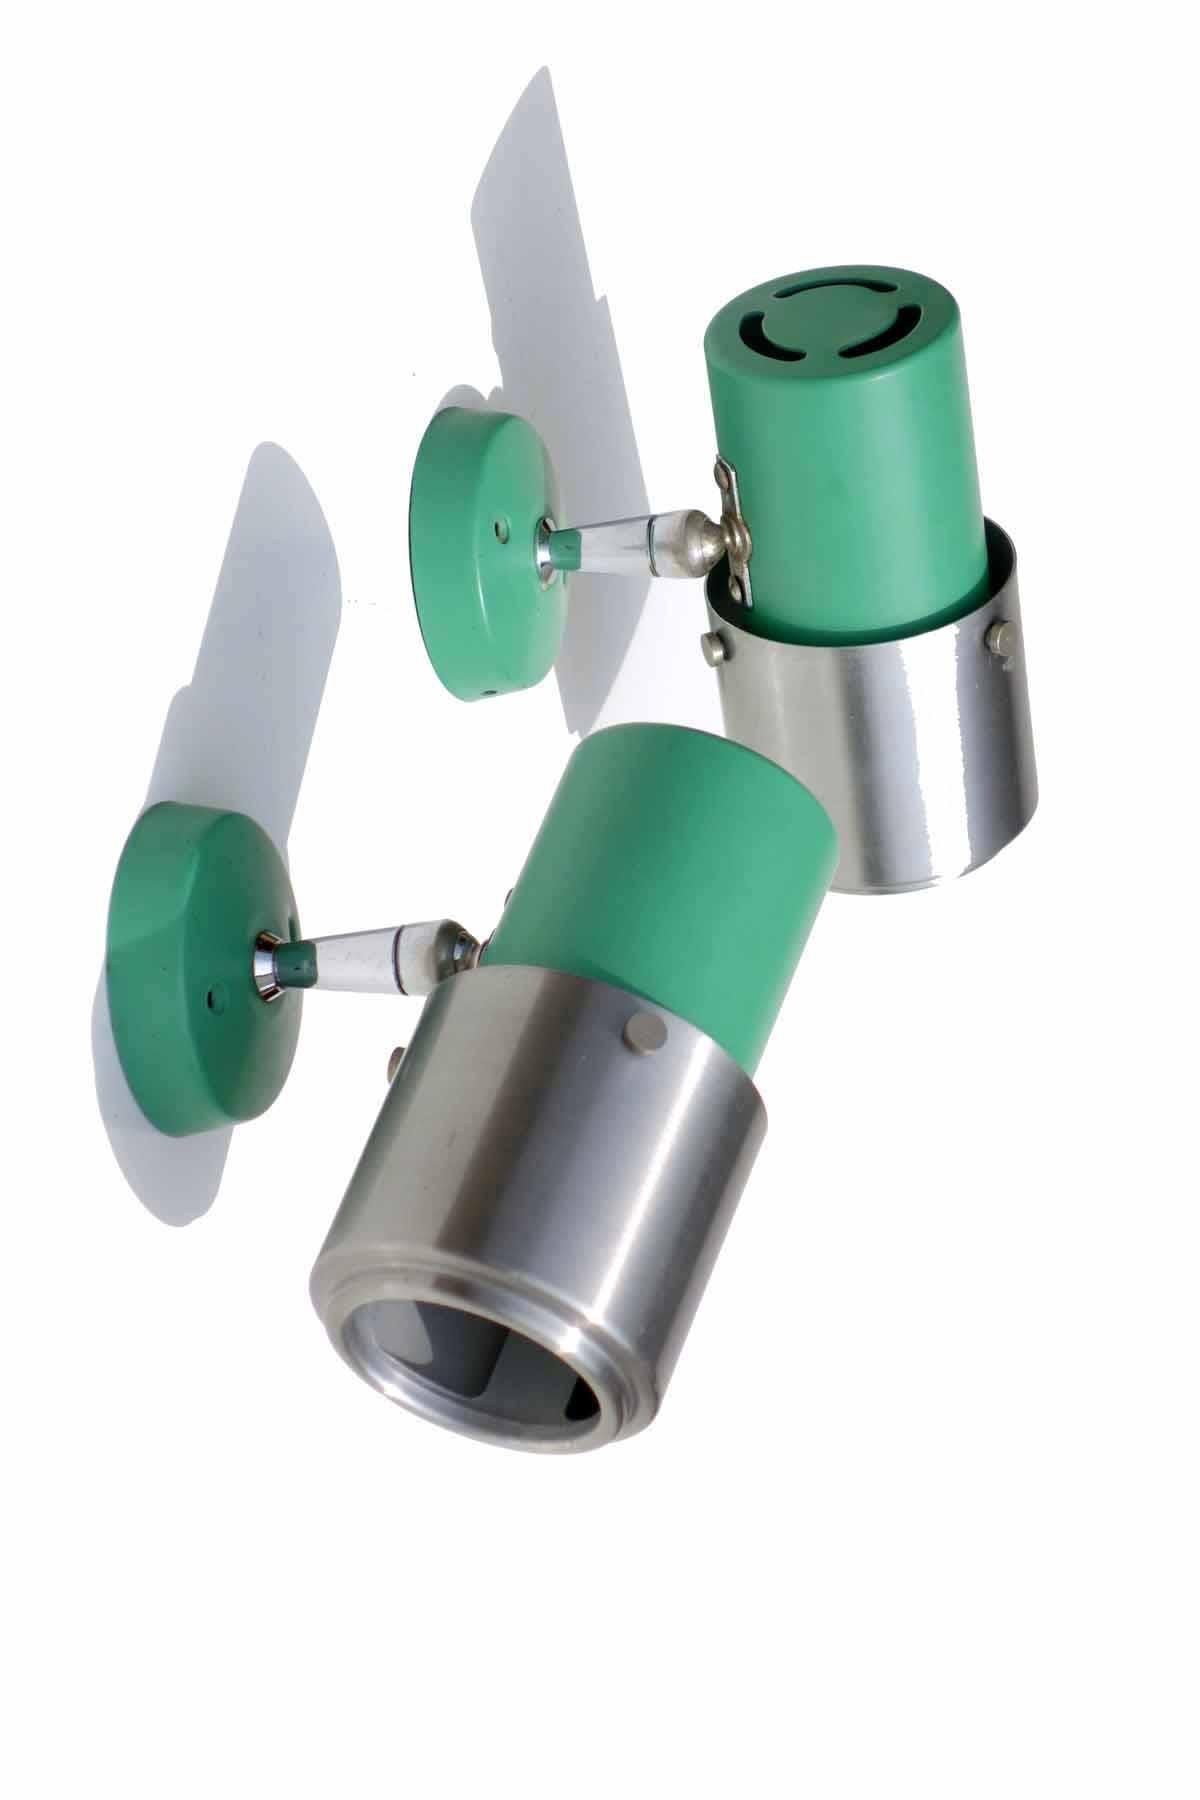 Emerald green and aluminum pair of the spotlights.
Excellent condiction.
Perfect working order.
     